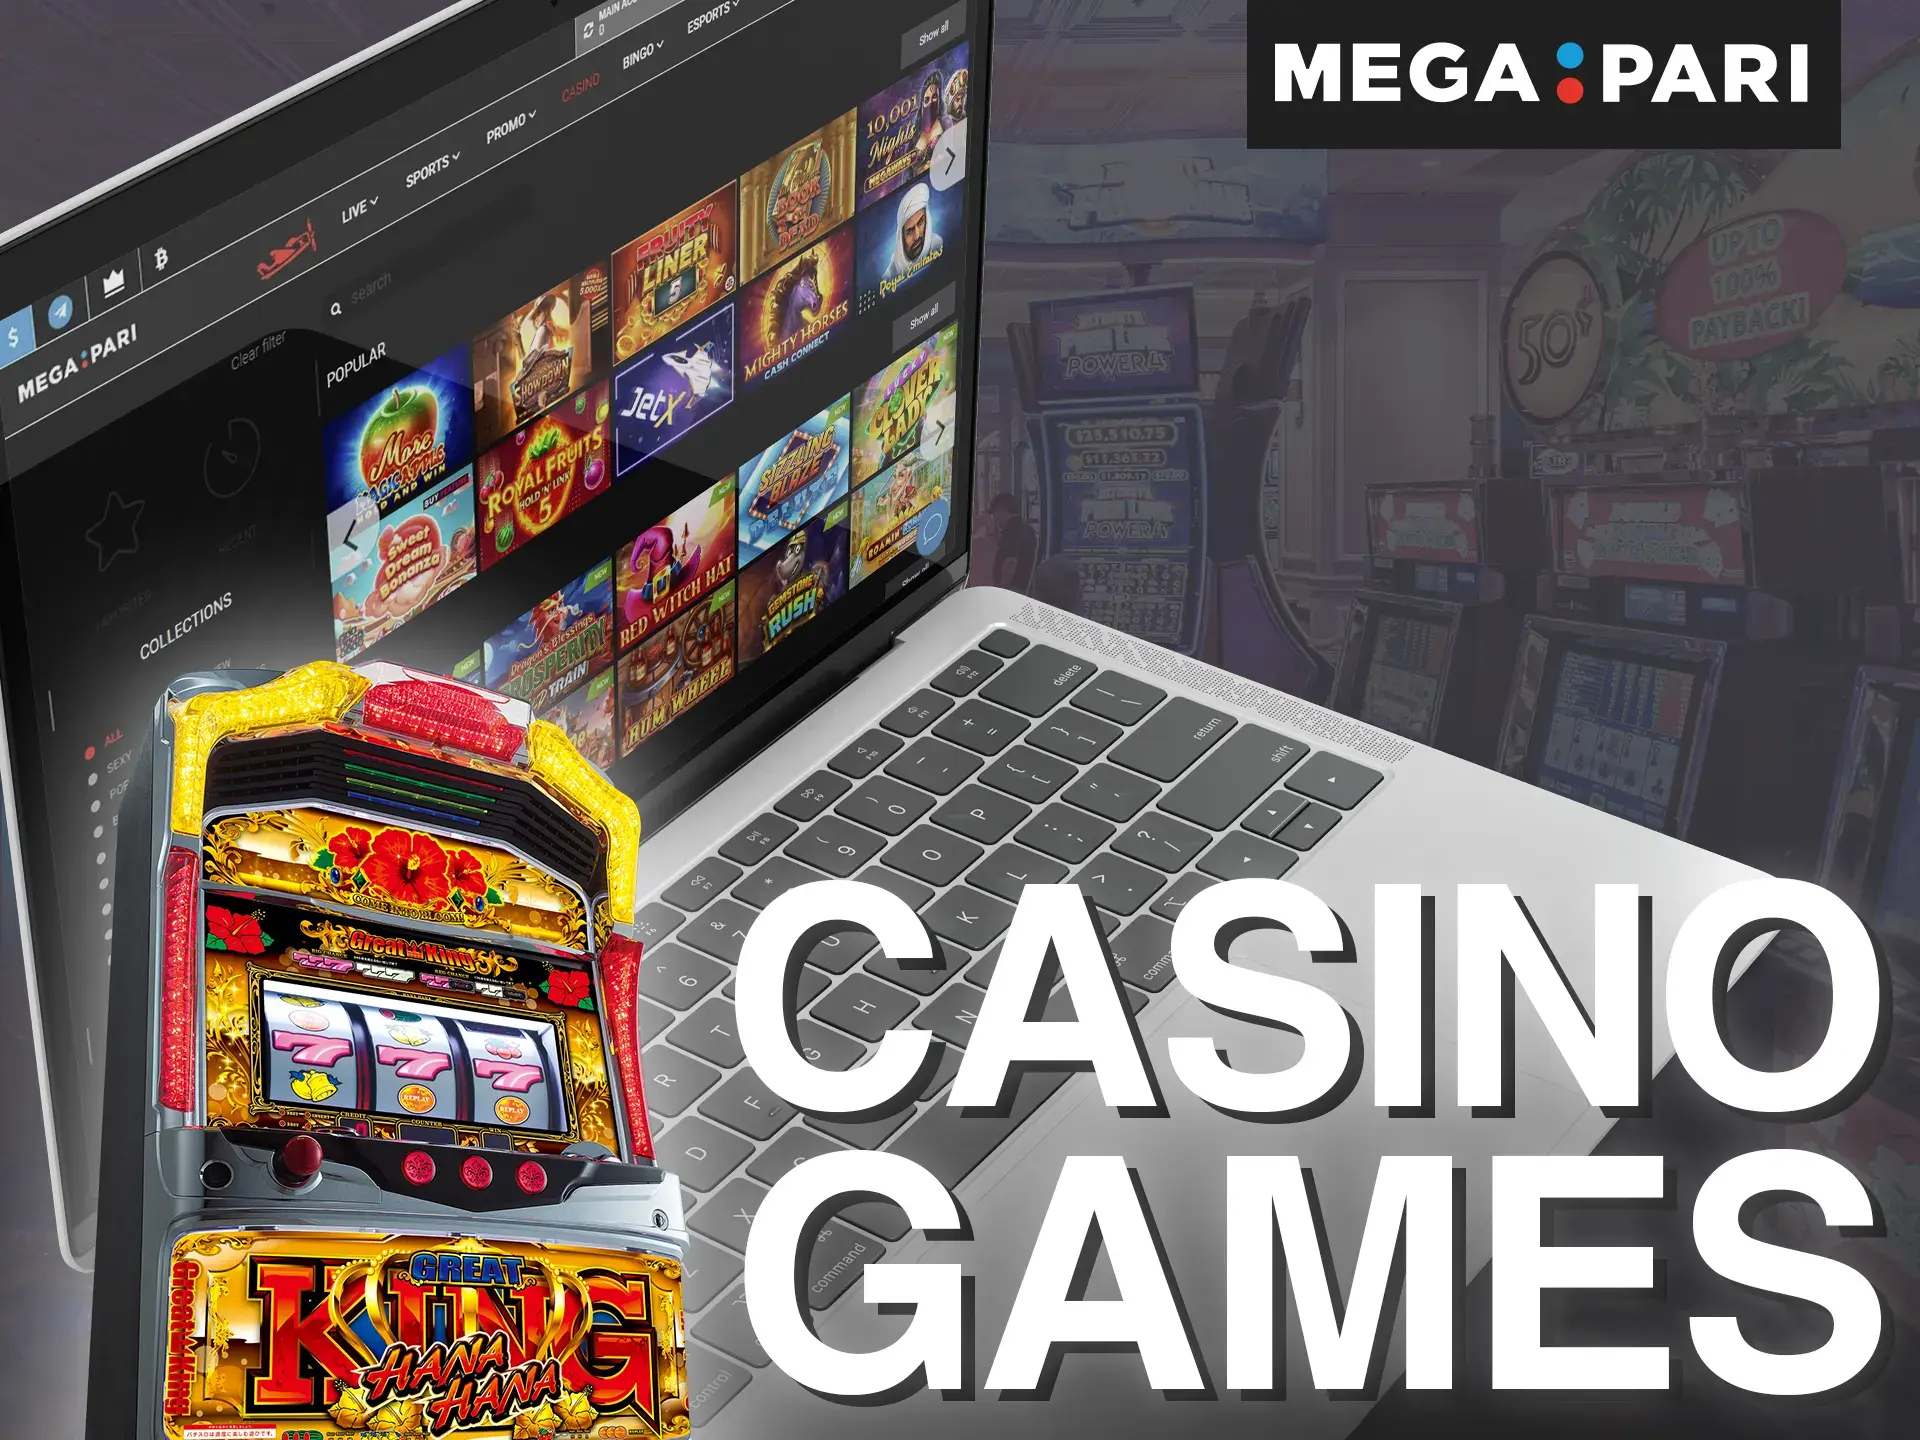 Megapari Casino offers a wide range of games to suit all tastes.